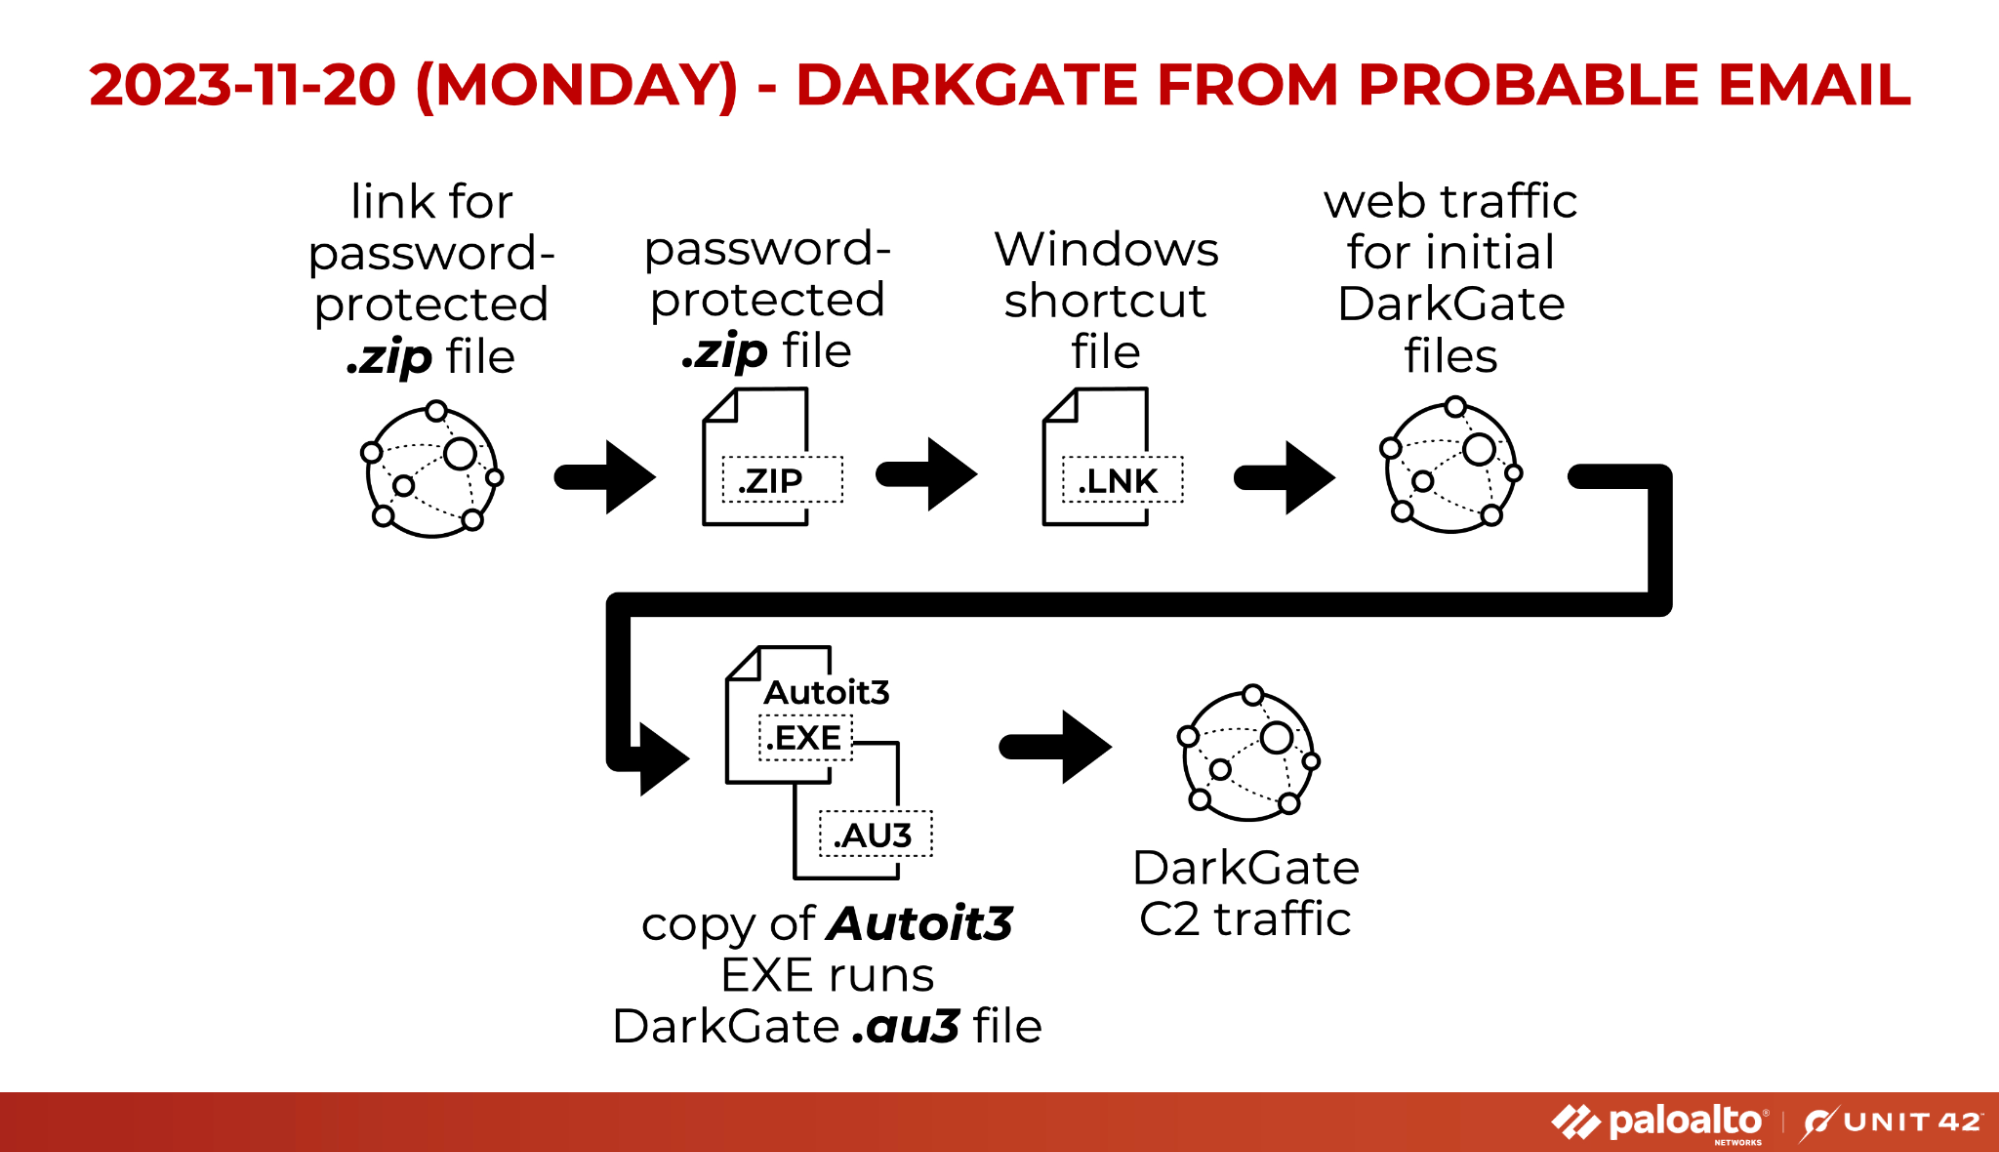 2023-11-20 (Monday) - DarkGate from Probable Email: link for password-protected .zip file > password-protected .zip file > Windows shortcut file > web traffic for initial DarkGate files > copy of Autoit3 EXE runs DarkGate .au3 file > DarkGate C2 traffic